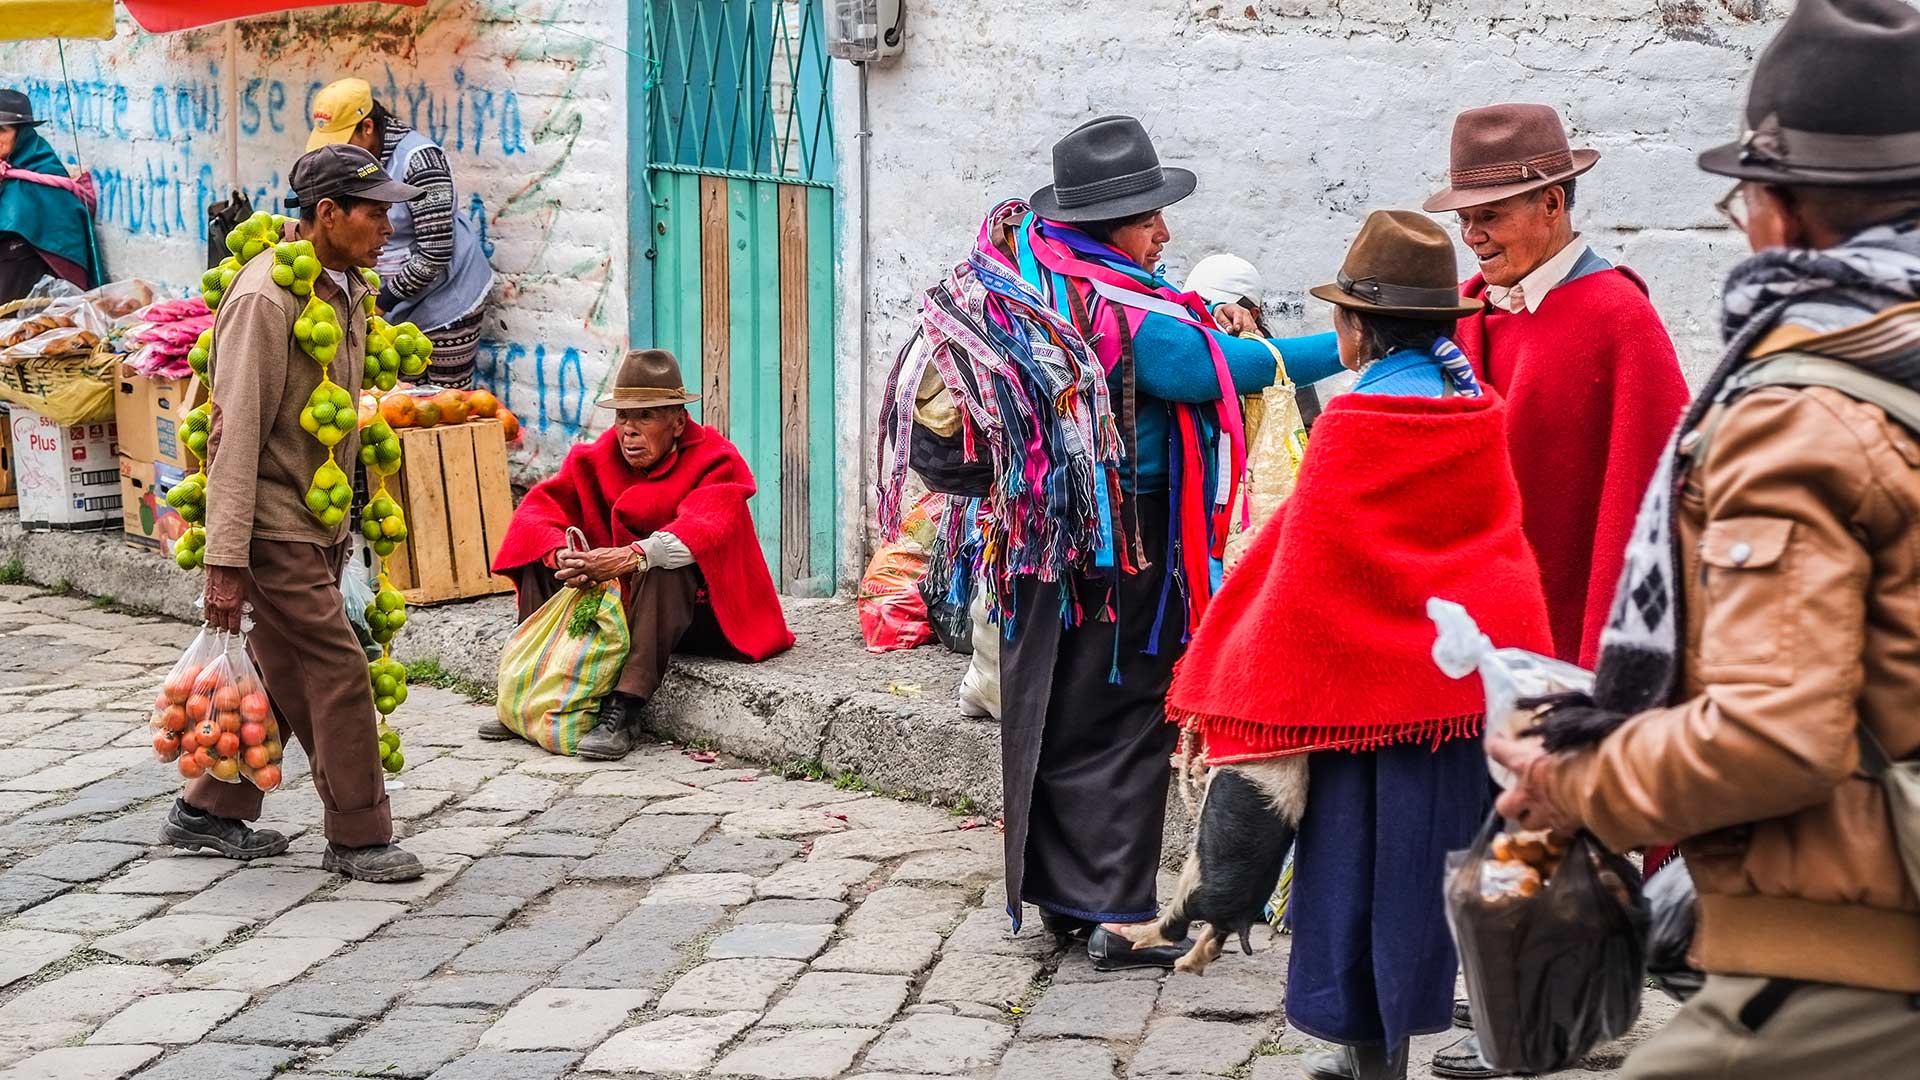 The streets of Guamote are always full of life and colour. Travel responsibly in Ecuador with Impactful Travel!